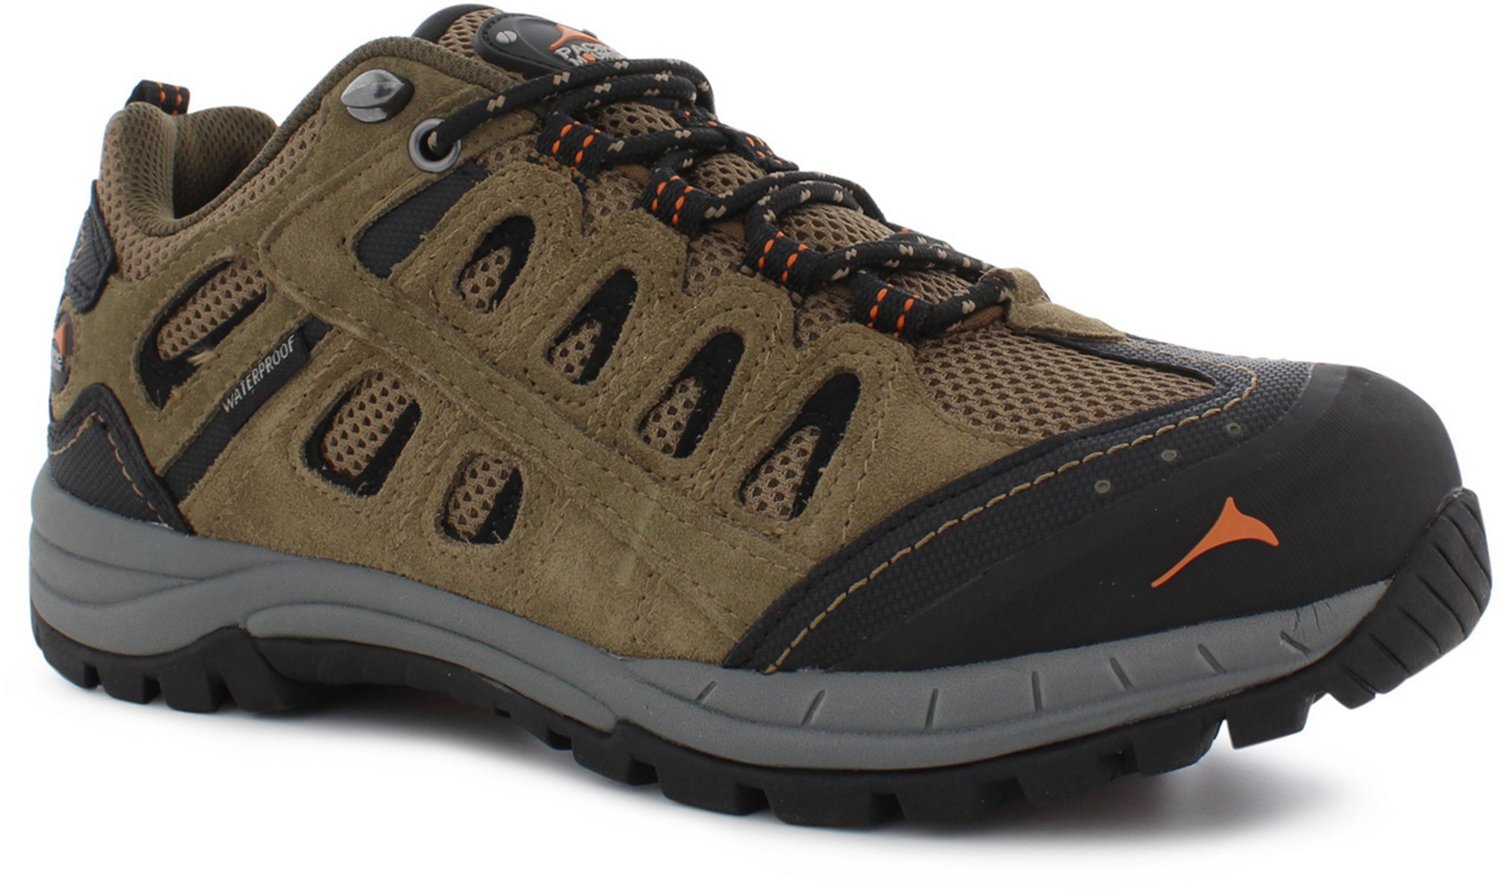 Pacific Mountain Mens Sanford Lo Waterproof Hiker Shoes